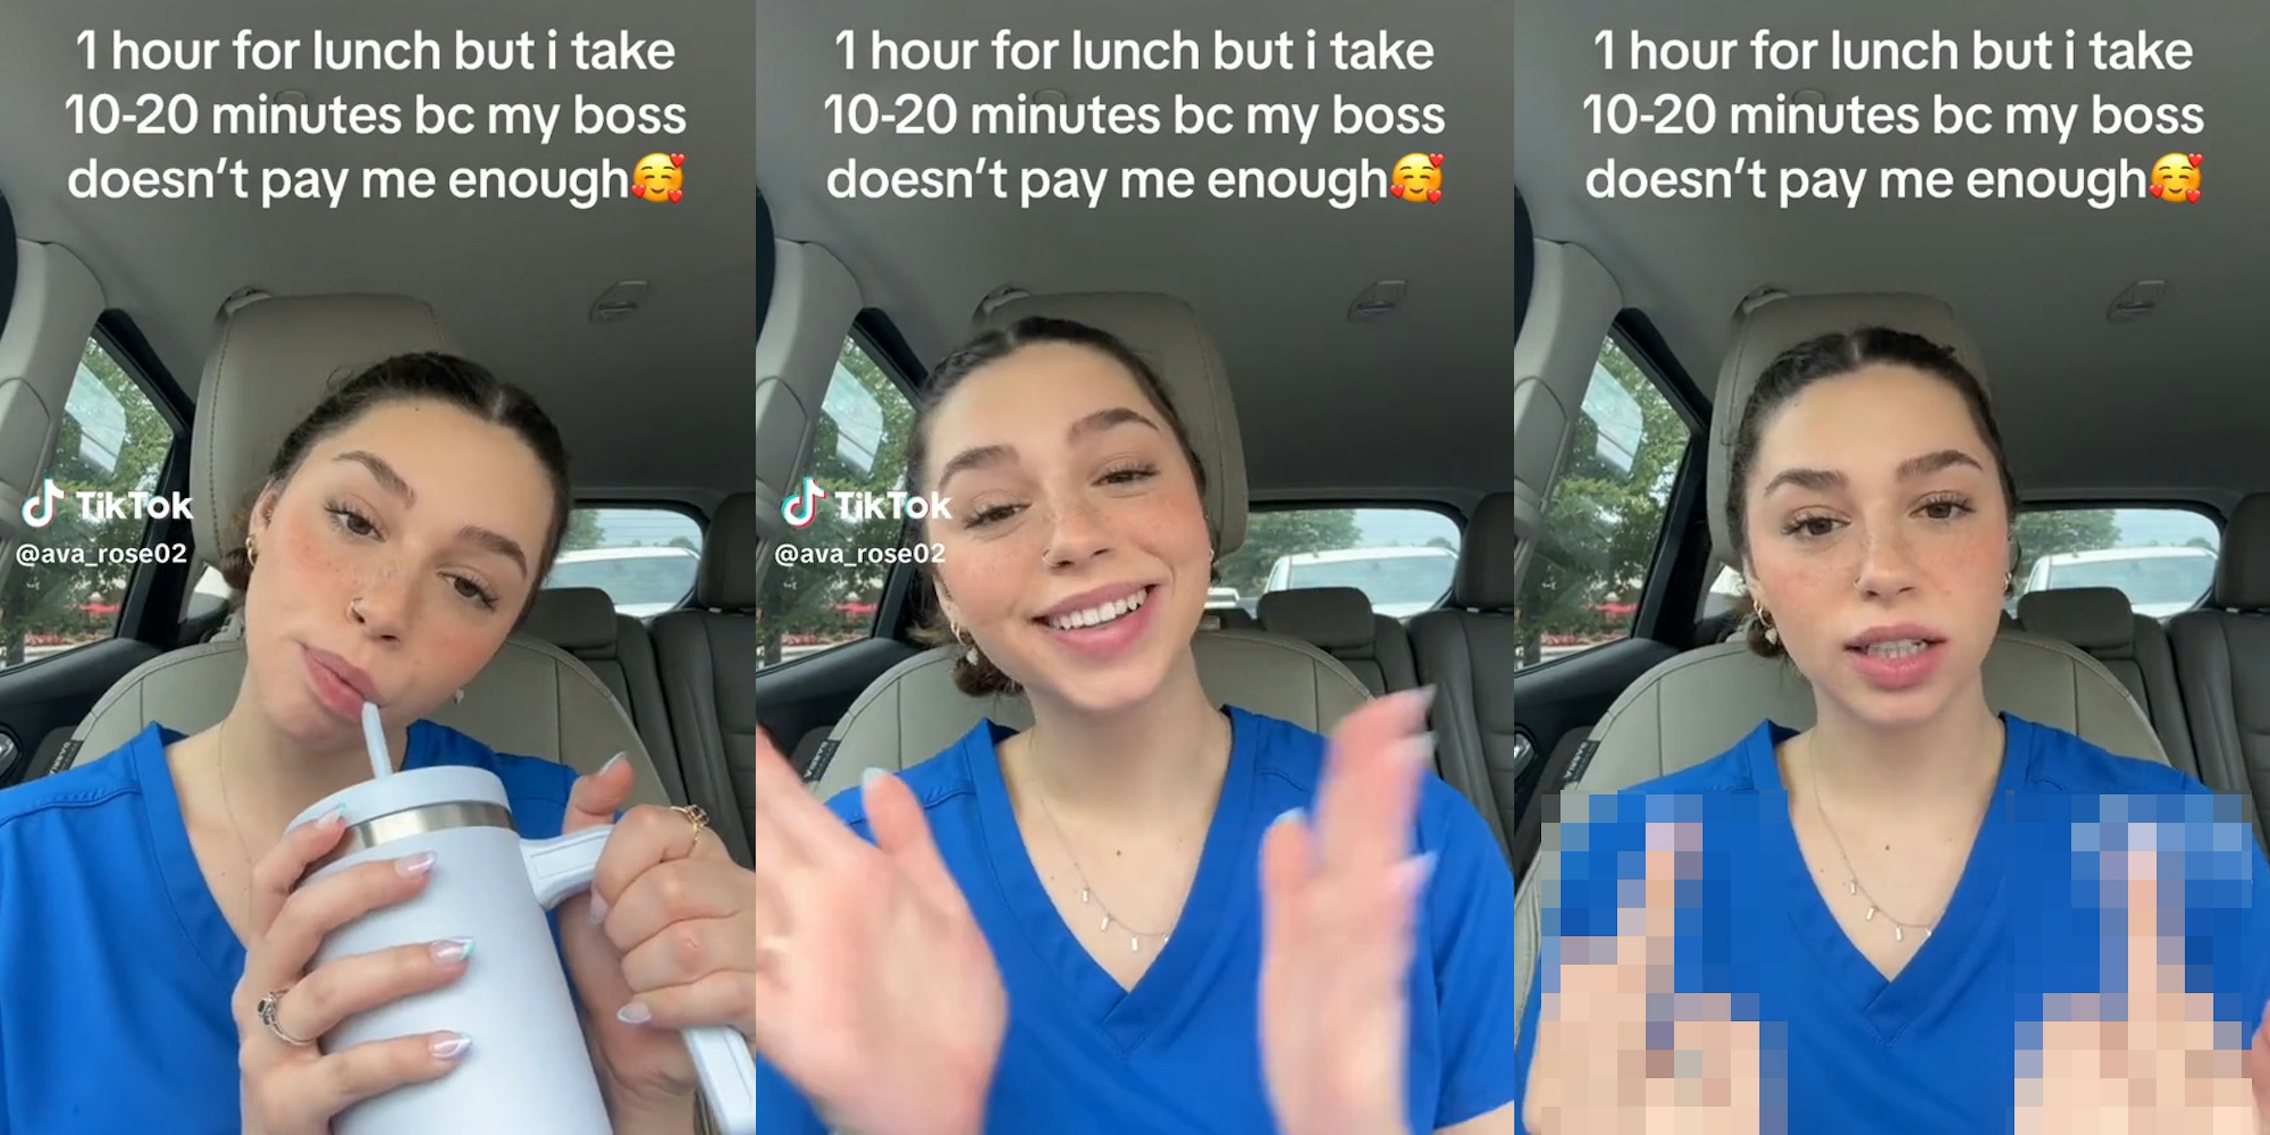 young woman in car with caption '1 hour for lunch but i take 10-20 minutes bc my boss doesn't pay me enough'